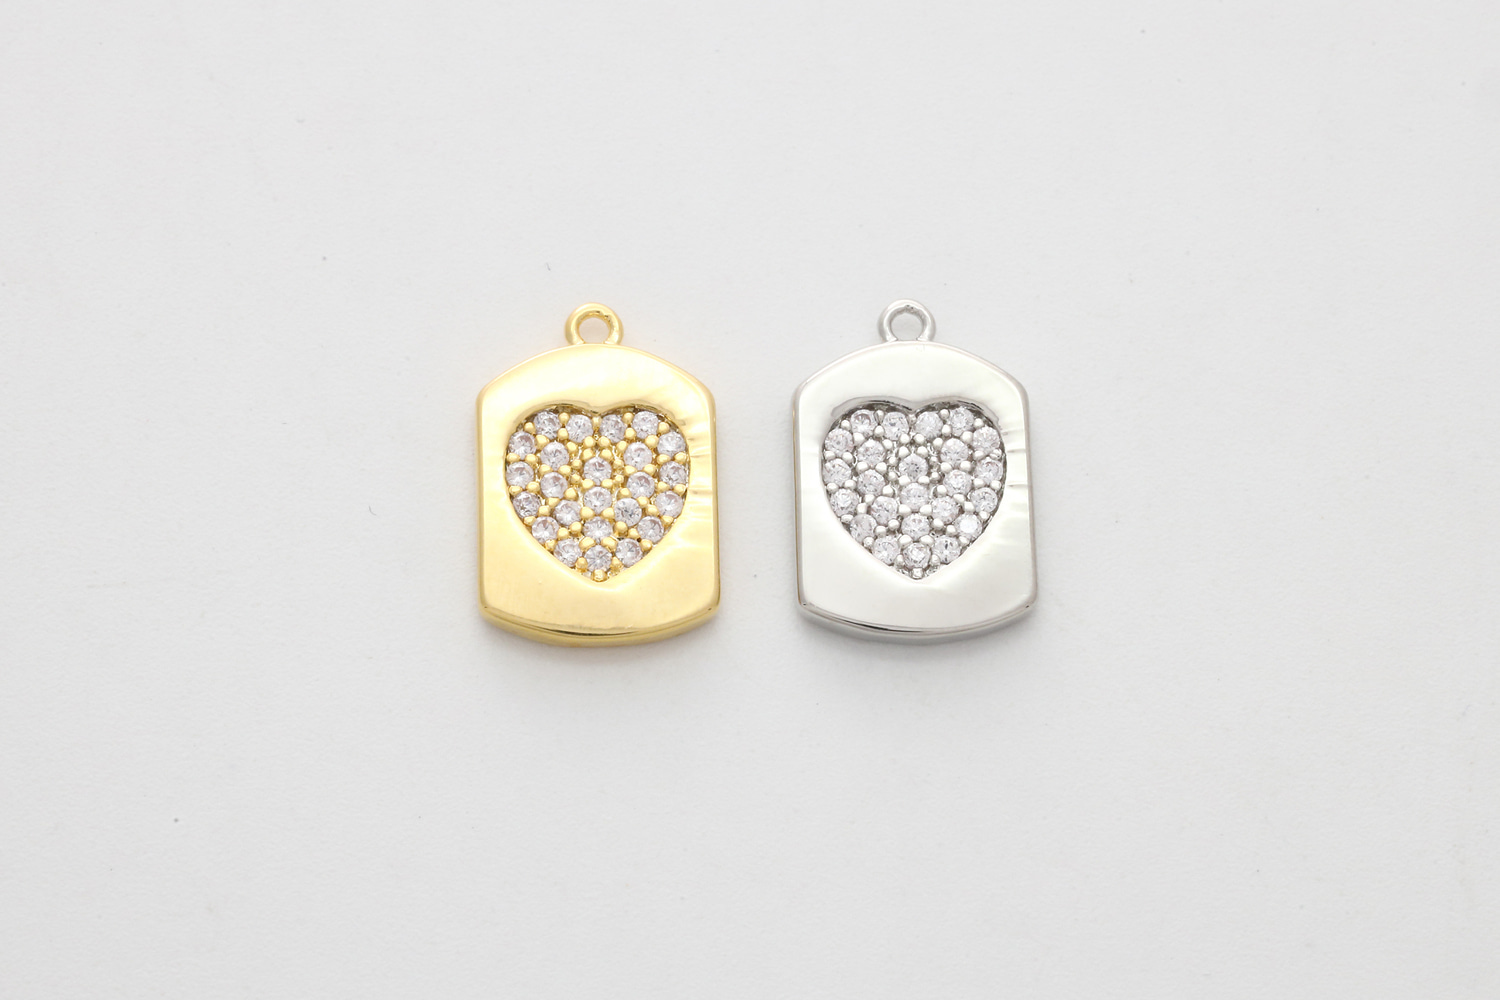 [N37-VC9] Dainty cubic heart charm, Brass, Cubic zirconia, Nickel free, Heart pendant, Unique charm, Jewelry making supplies, 1 piece (N37-G15, N37-G15R)